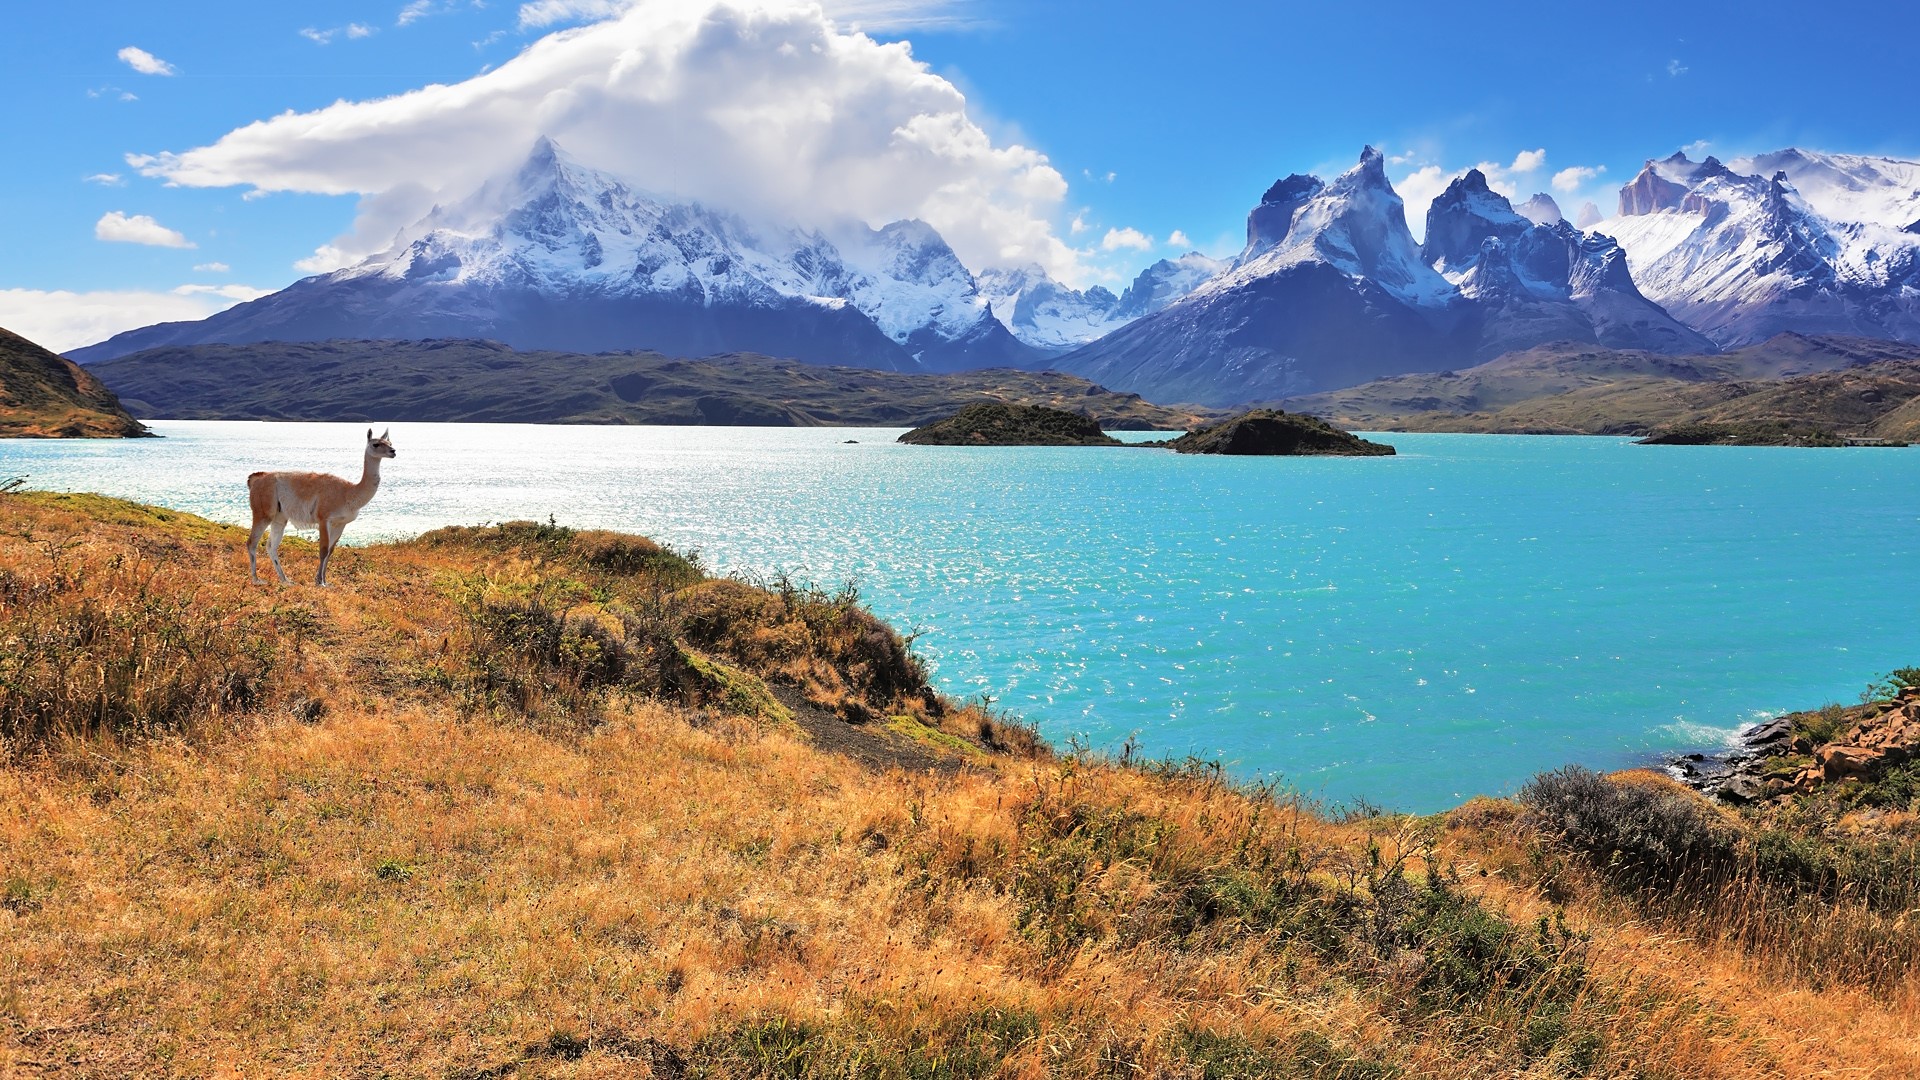 General 1920x1080 Torres del Paine Chile mountains clouds lake snow sky South America animals snowy peak nature Patagonia landscape